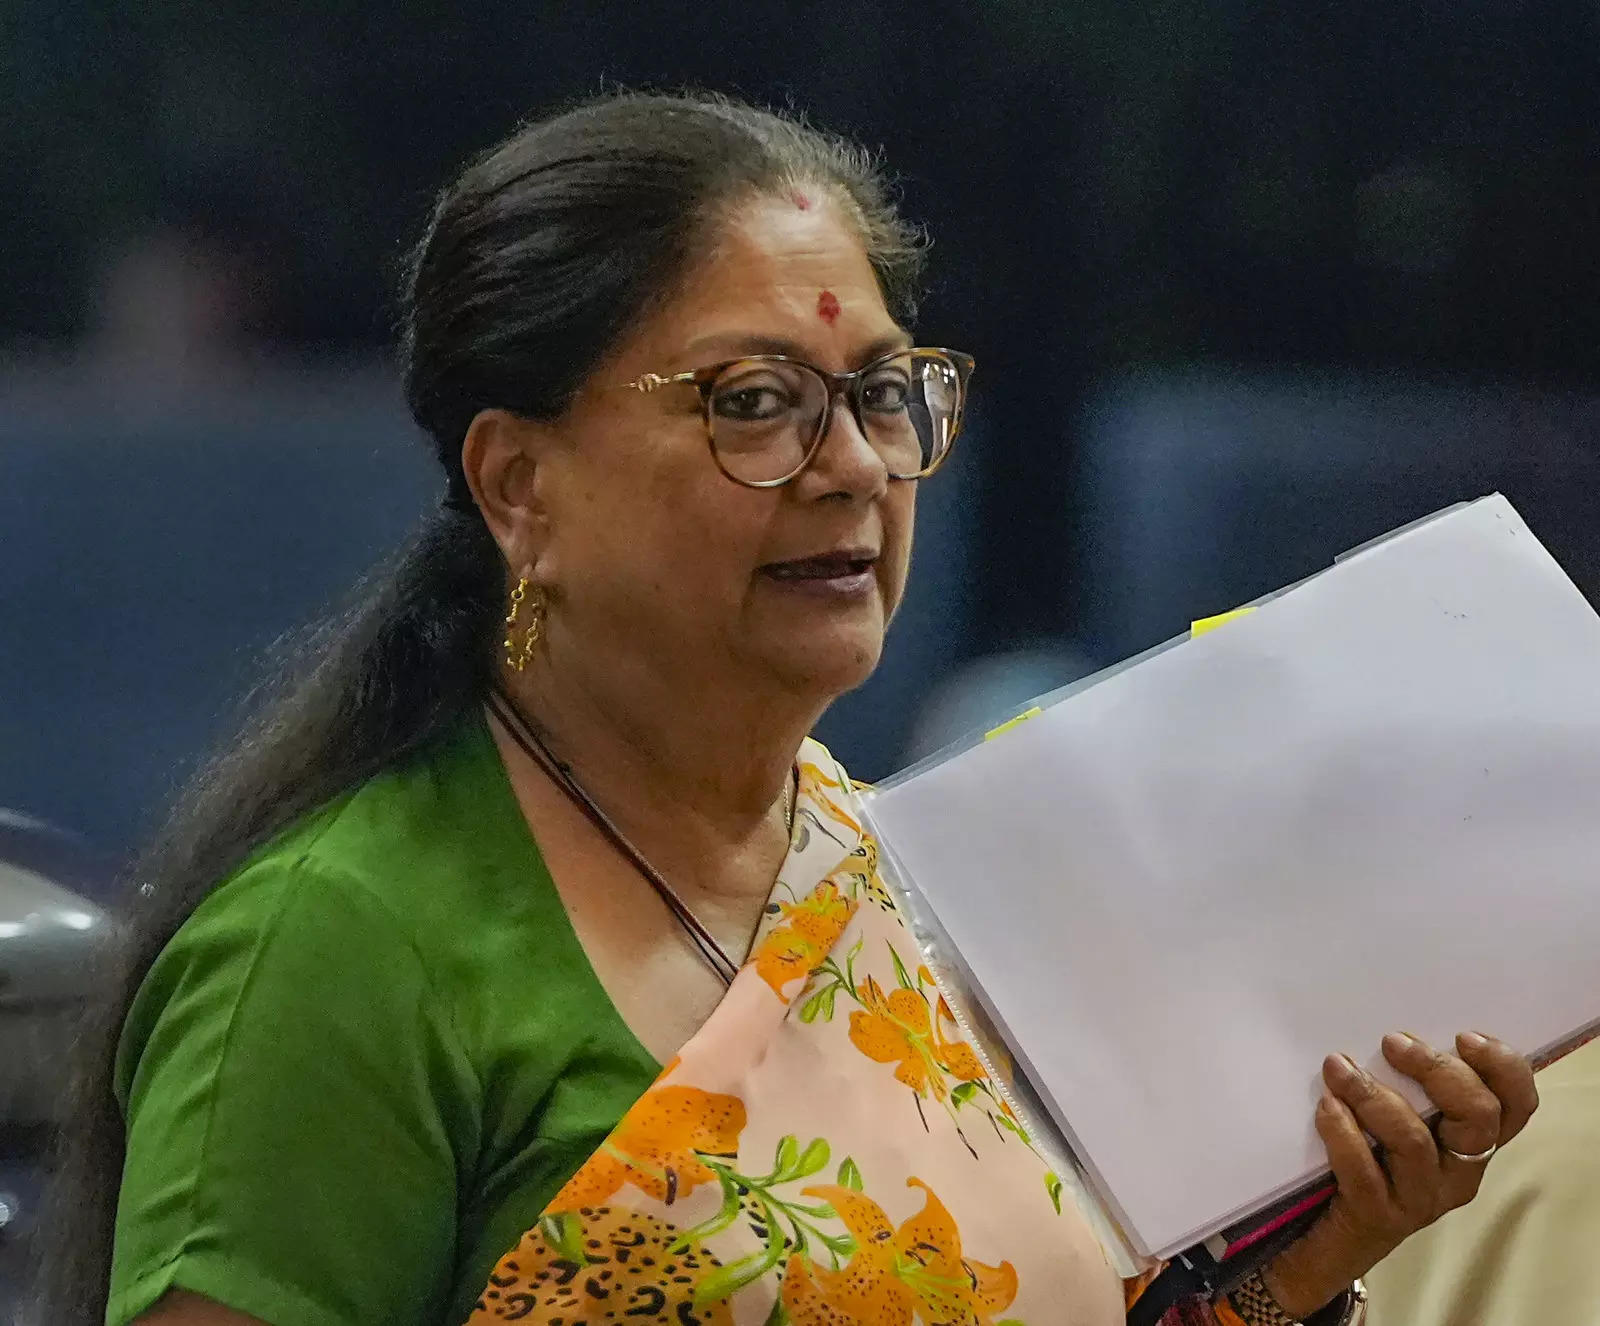 I feel I can retire now: Vasundhara Raje after hearing son speak at rally 